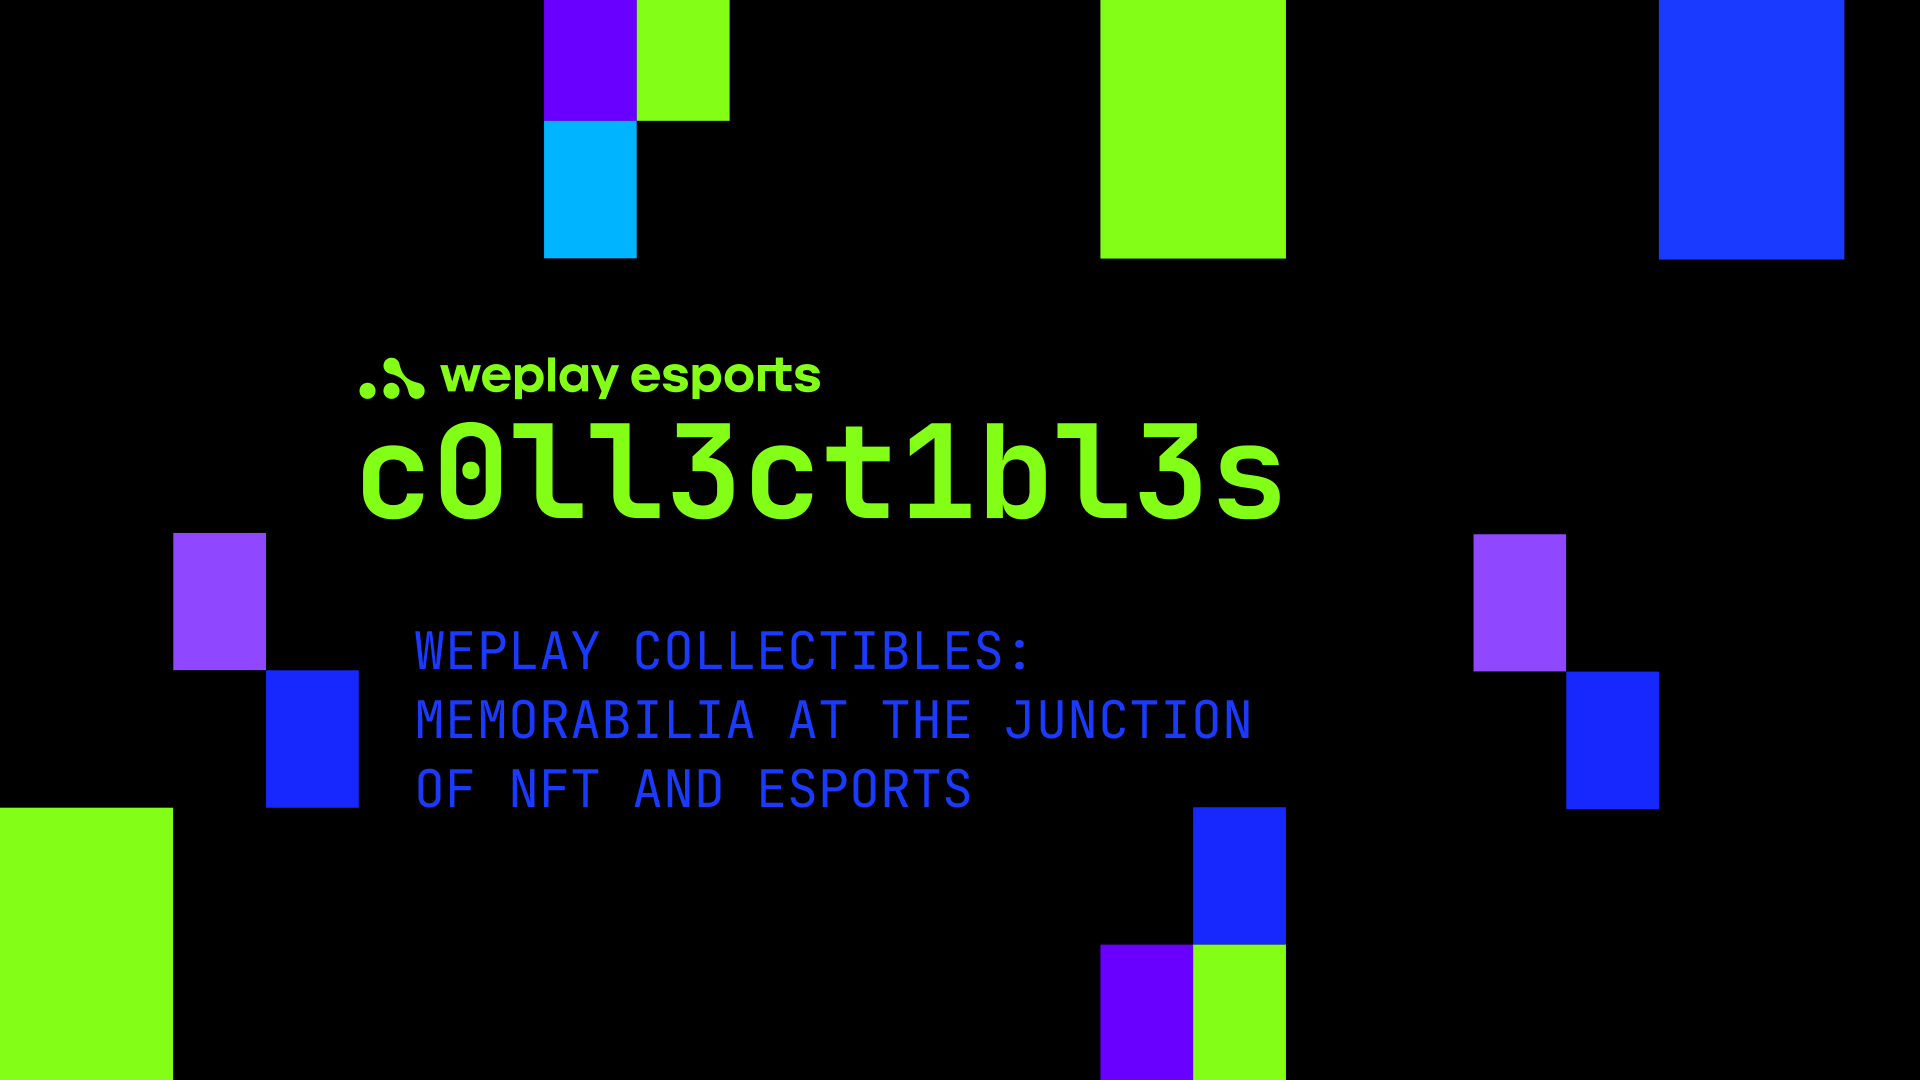 WePlay Collectibles: memorabilia at the junction of NFT and esports